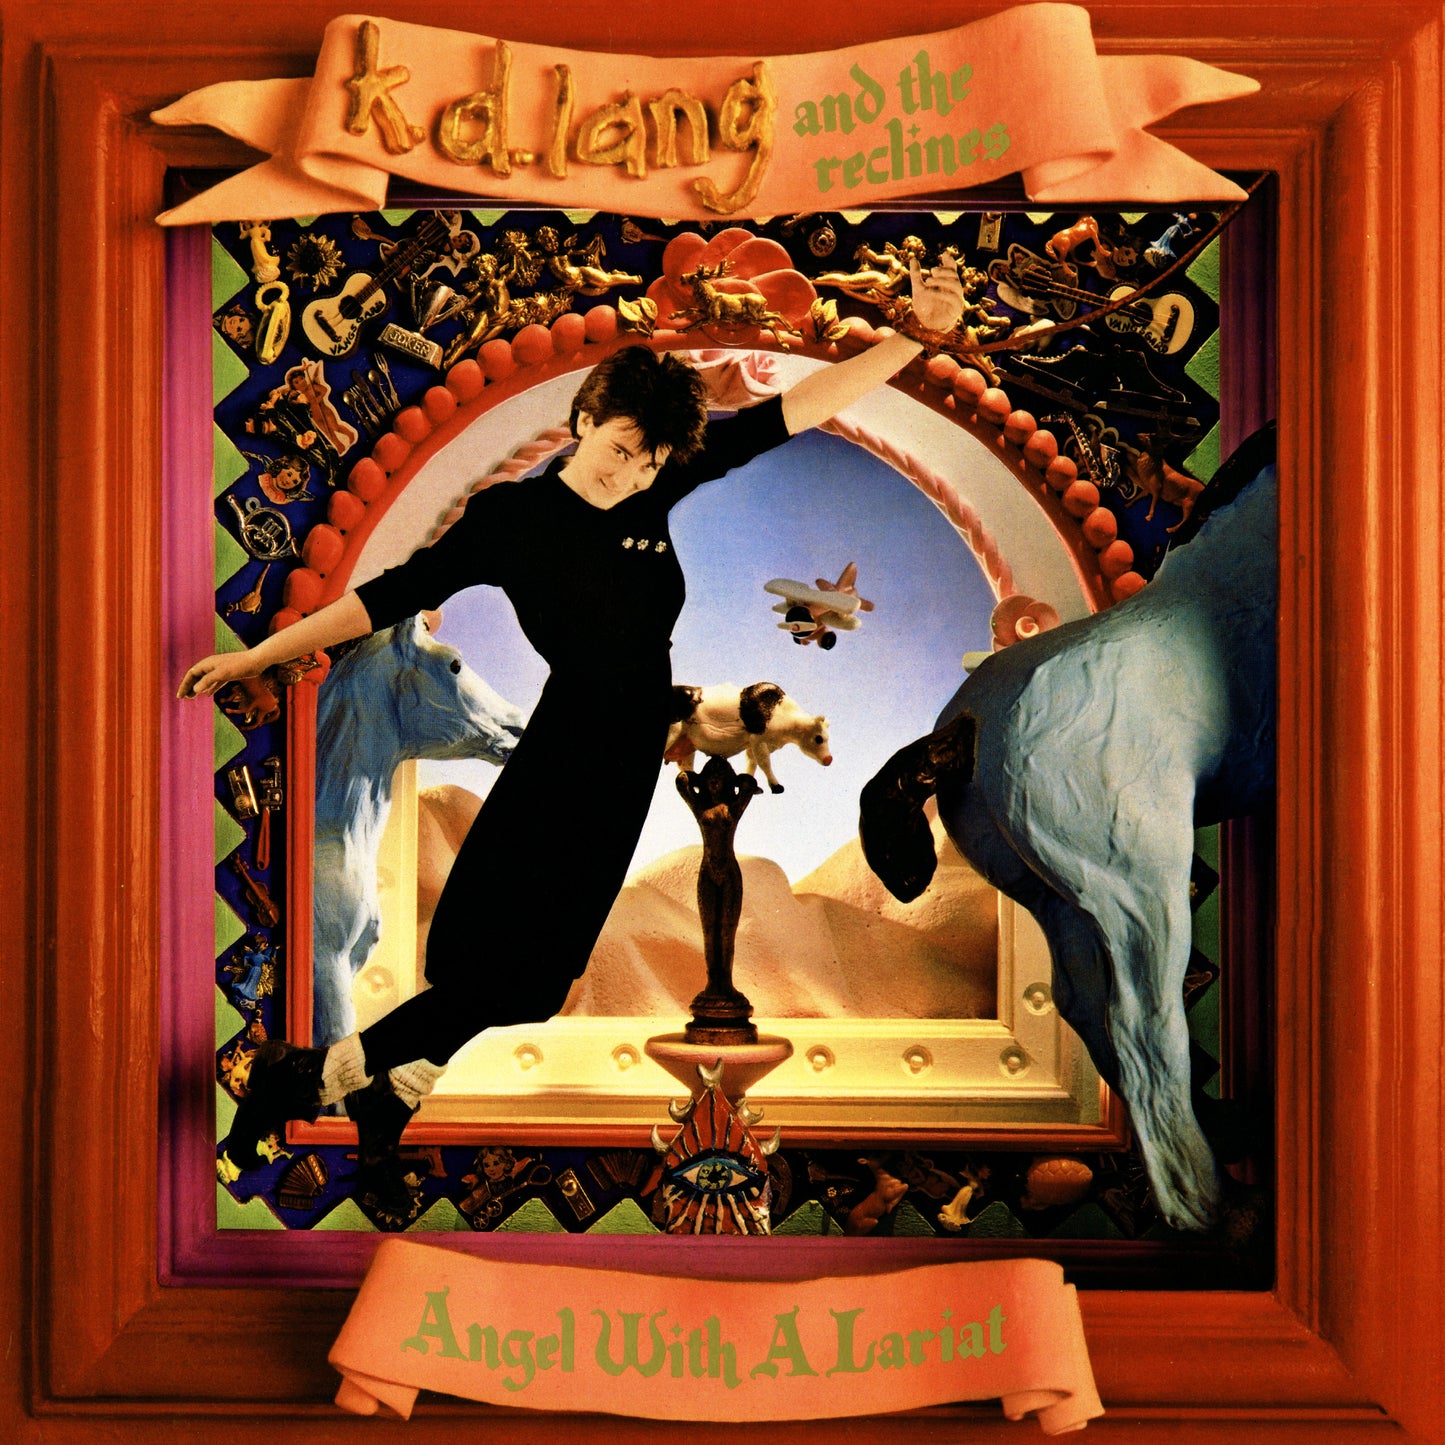 k.d. lang  - Angel with A Lariat